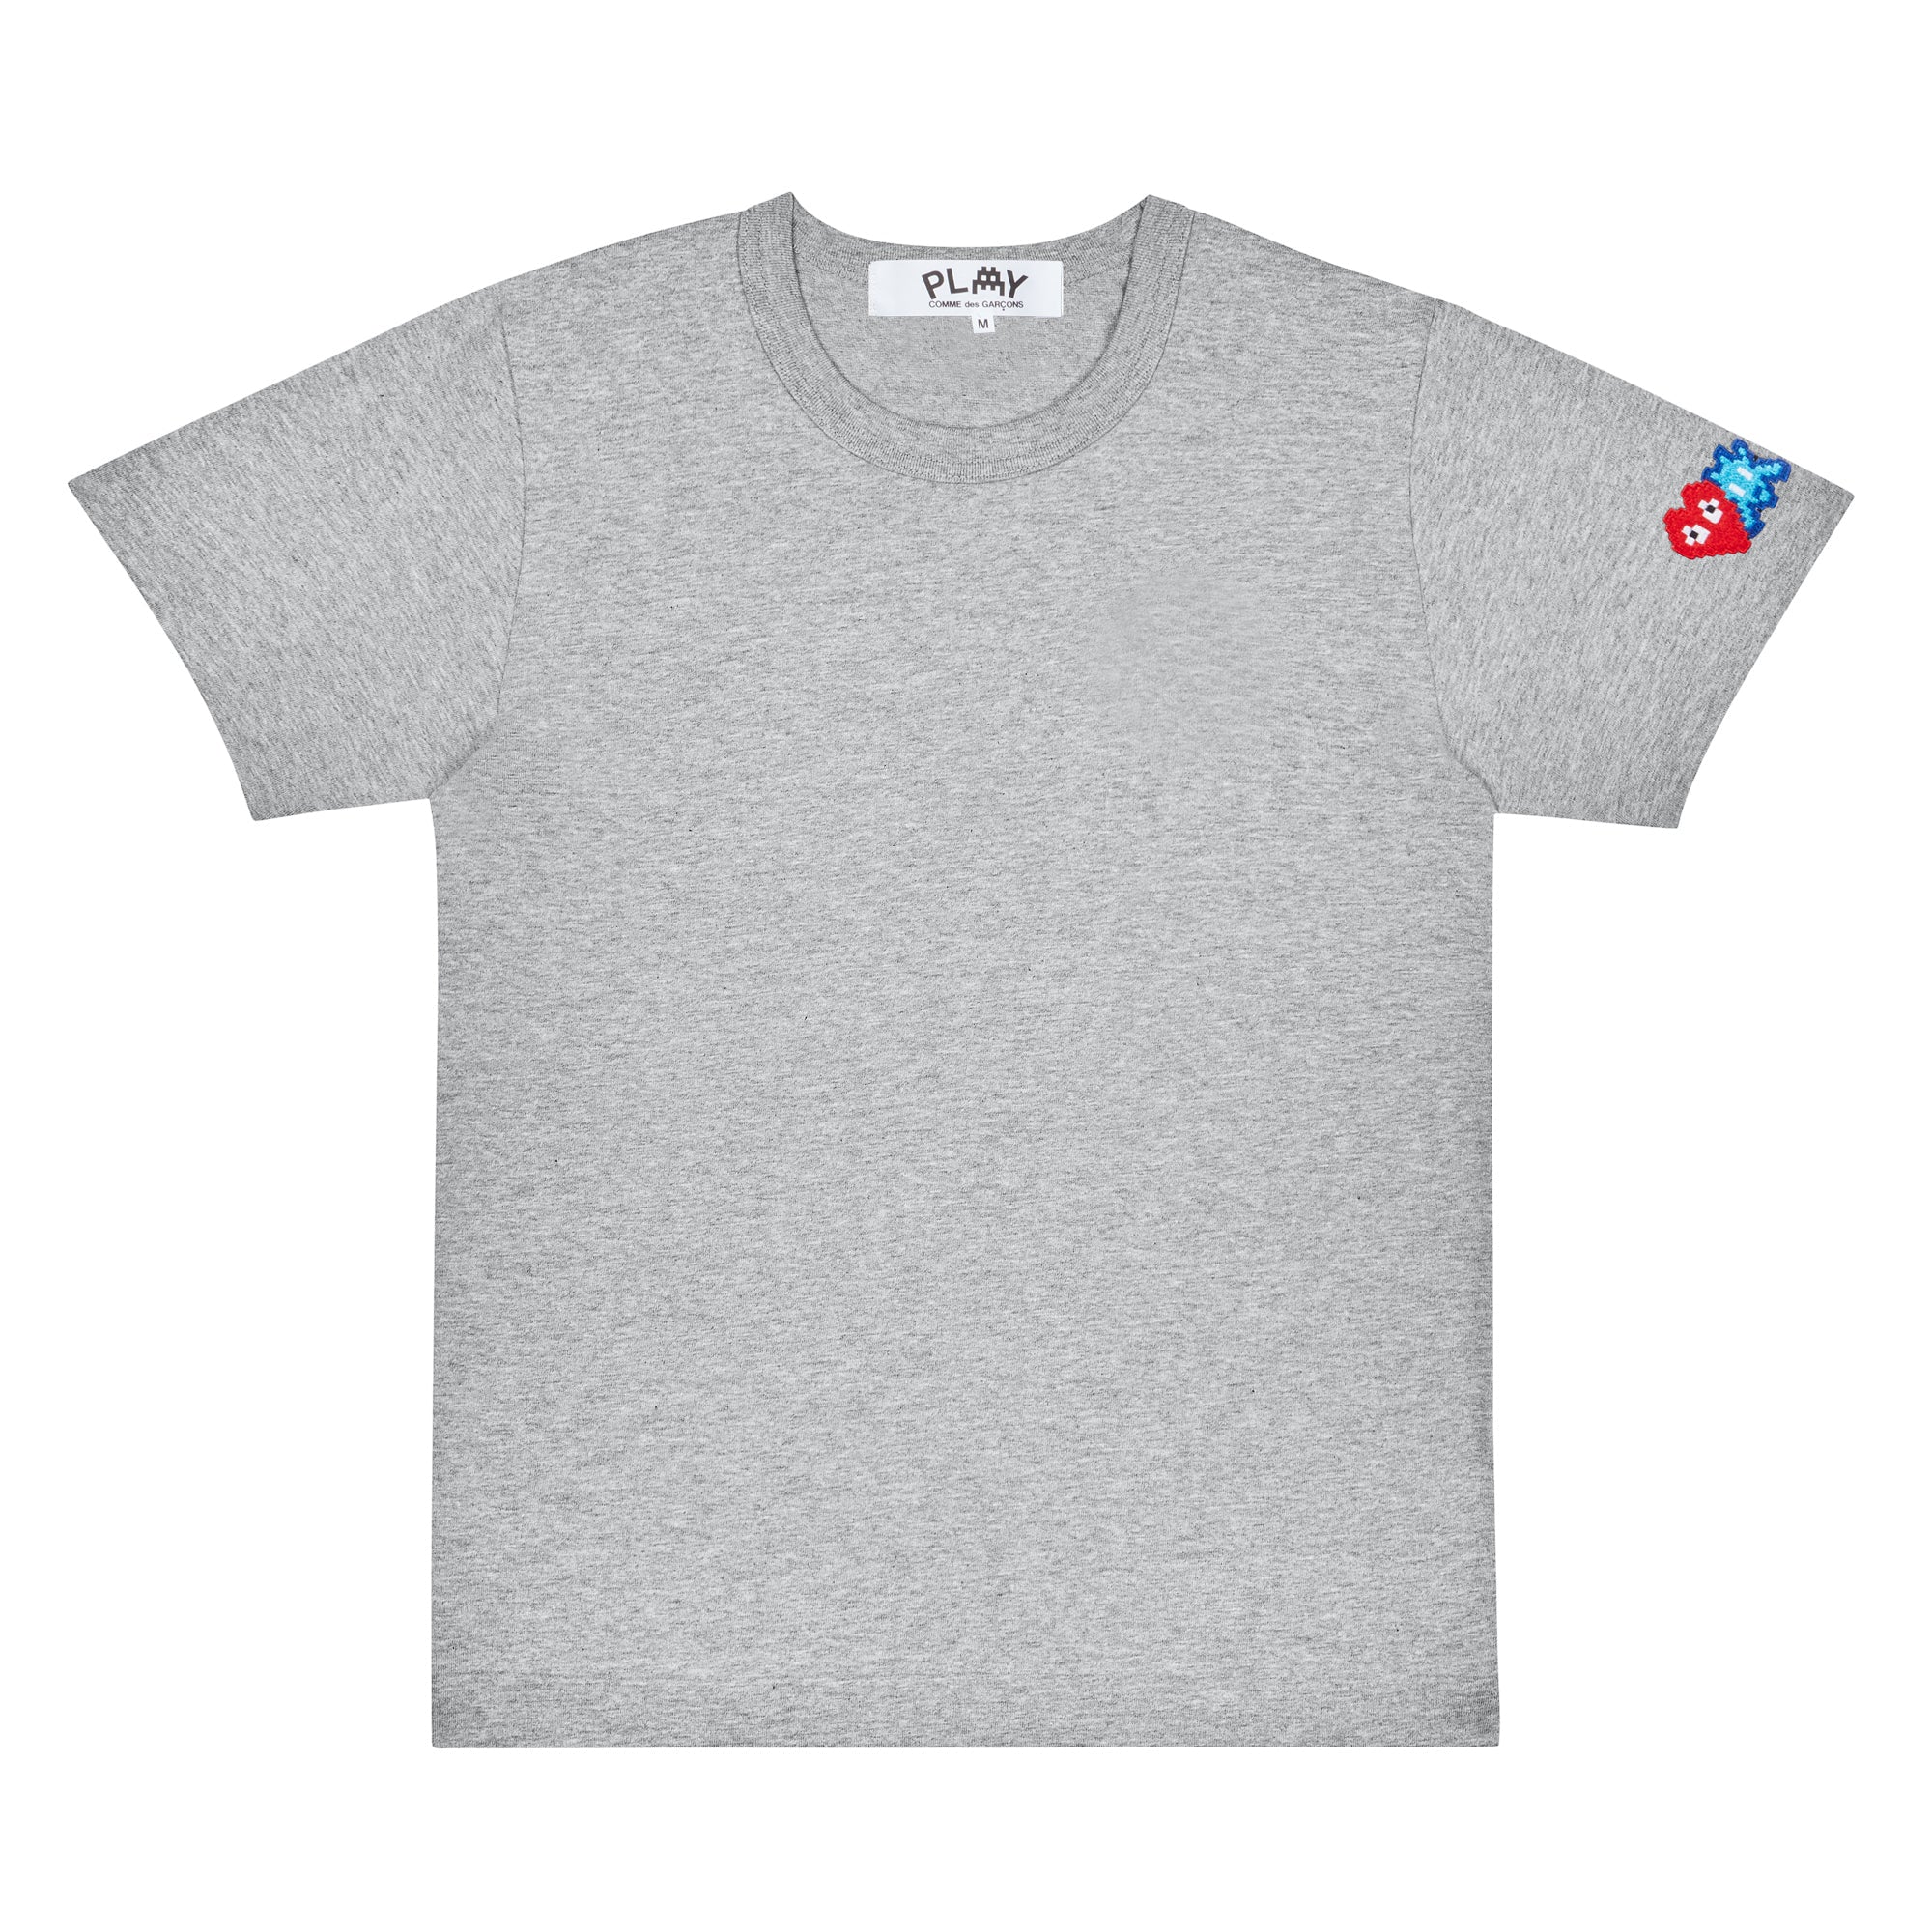 PLAY Invader T-Shirt Red and Blue Sleeve Emblem (Grey)